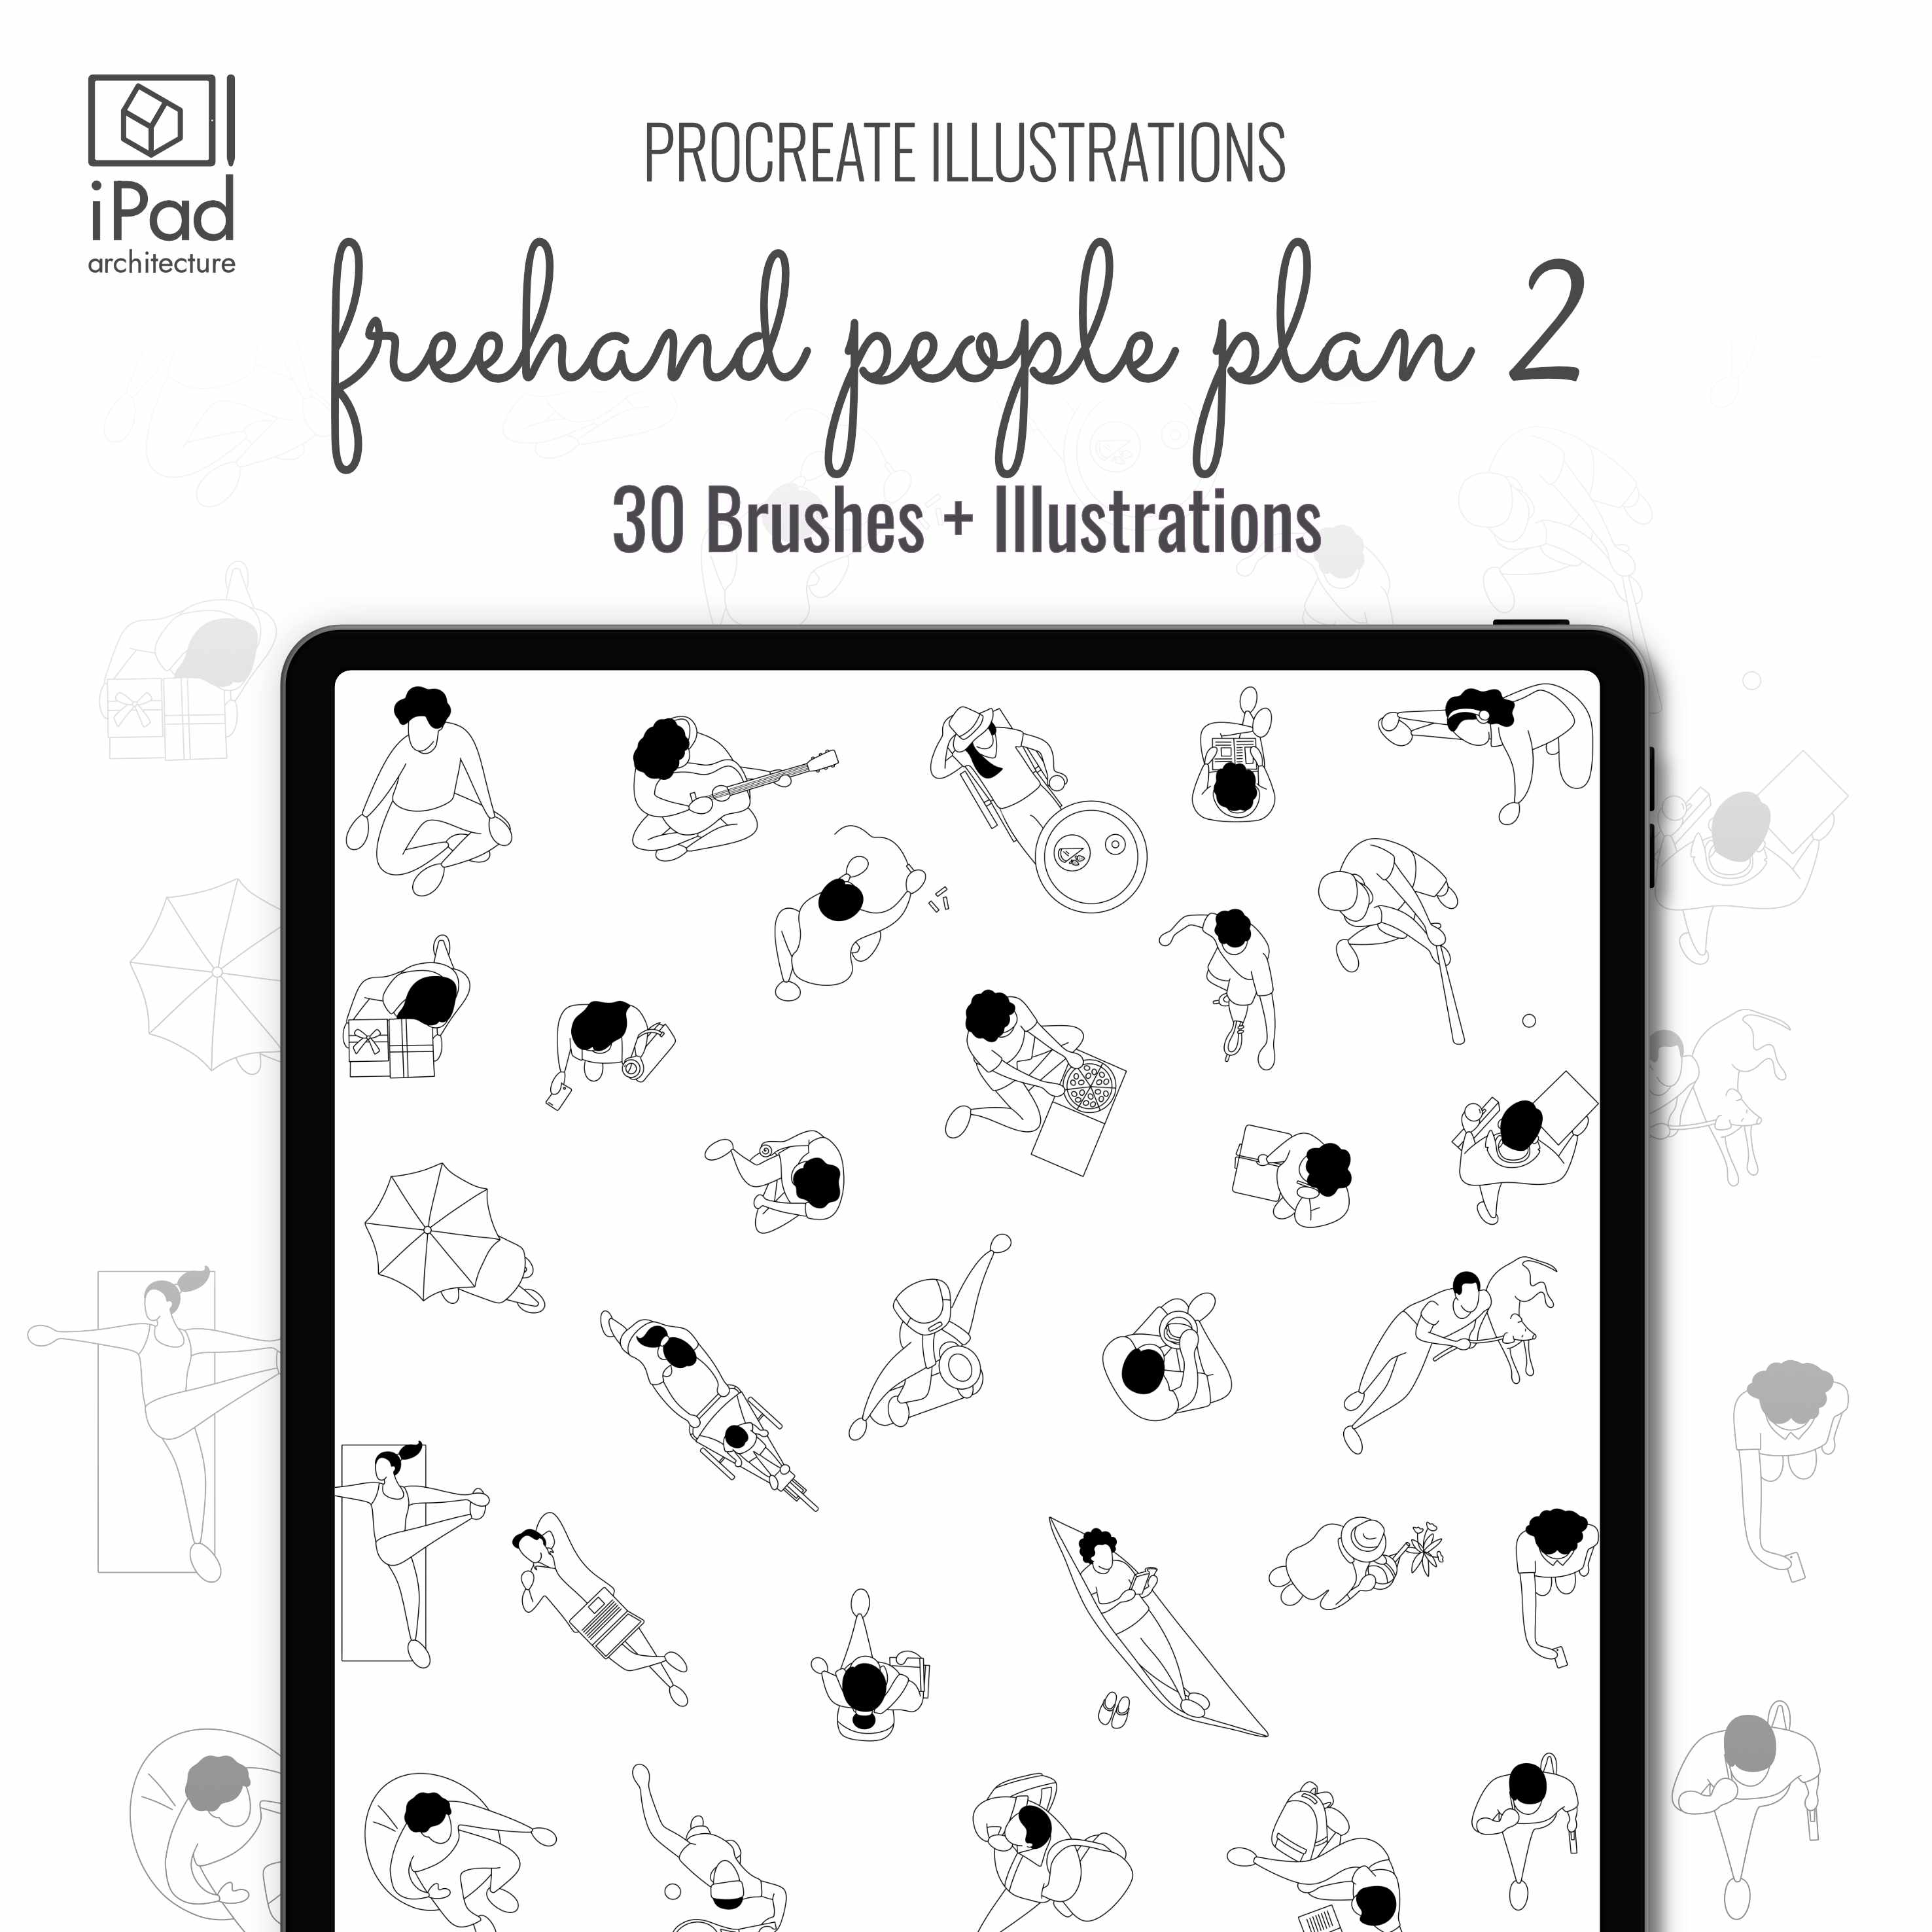 Procreate Freehand People Plan View Brushset & Illustrations 2 PNG - Toffu Co